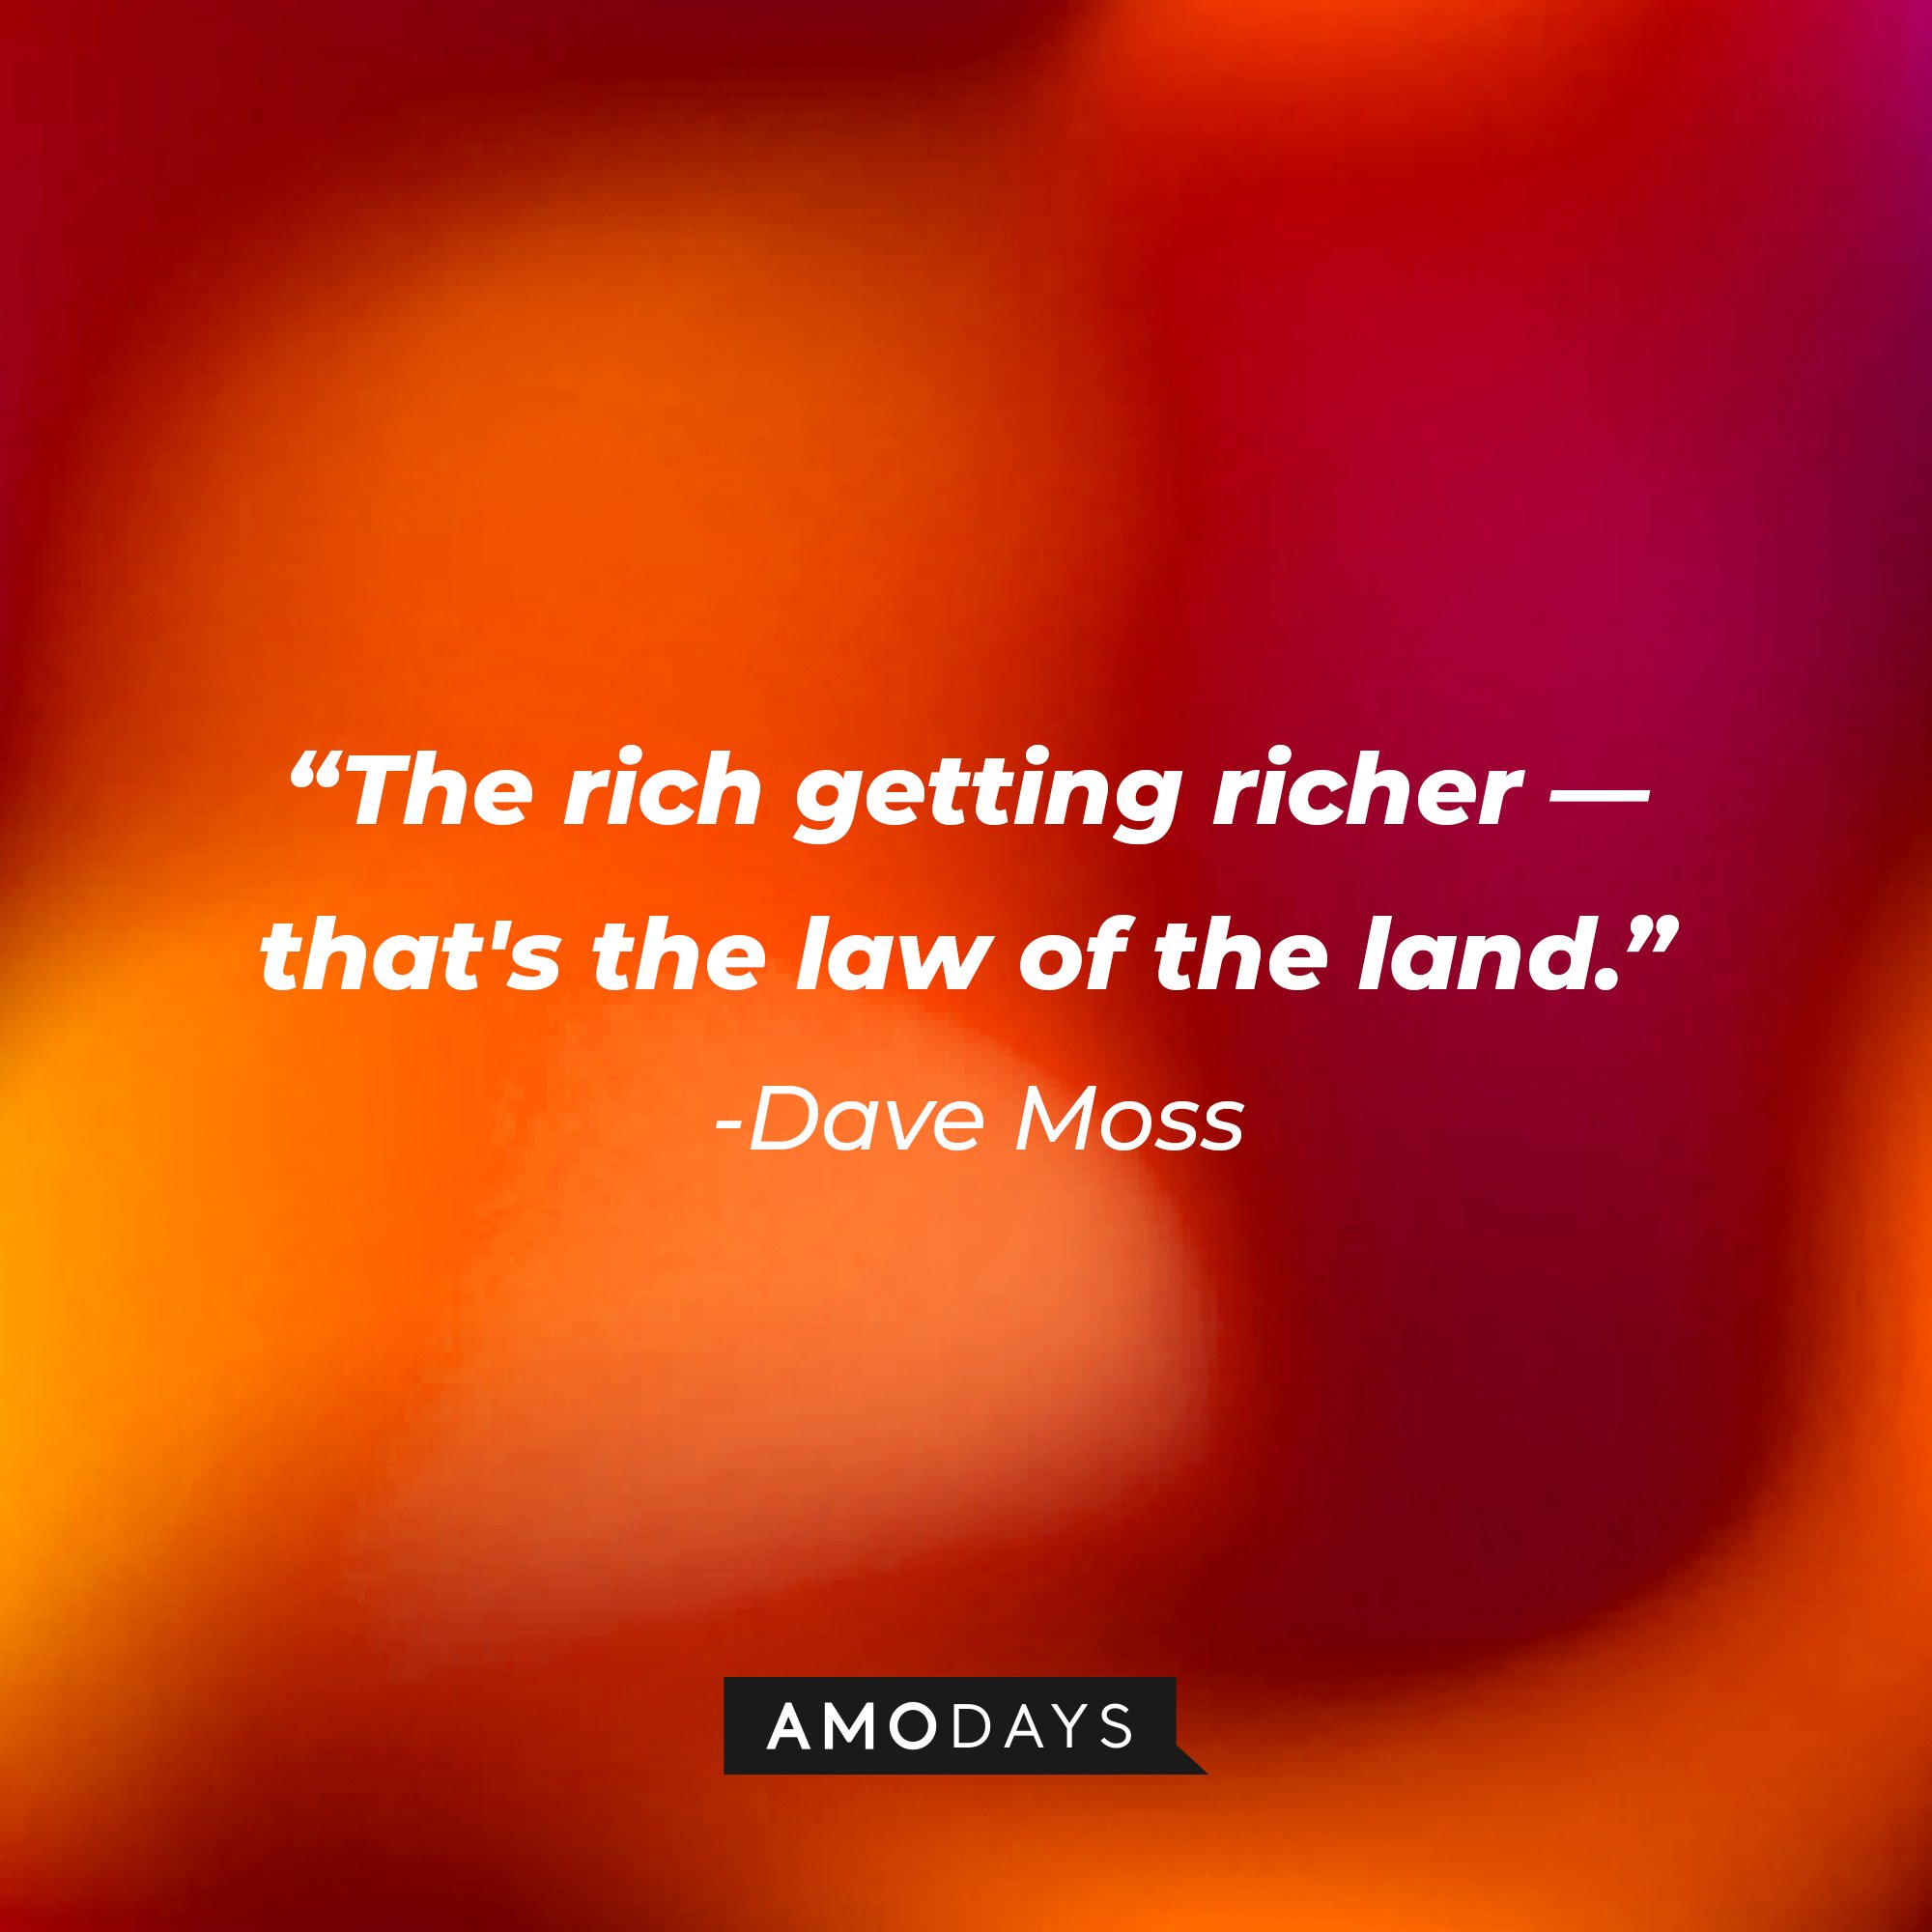 Dave Moss’s quote: "The rich getting richer — that's the law of the land.” | Image: AmoDays